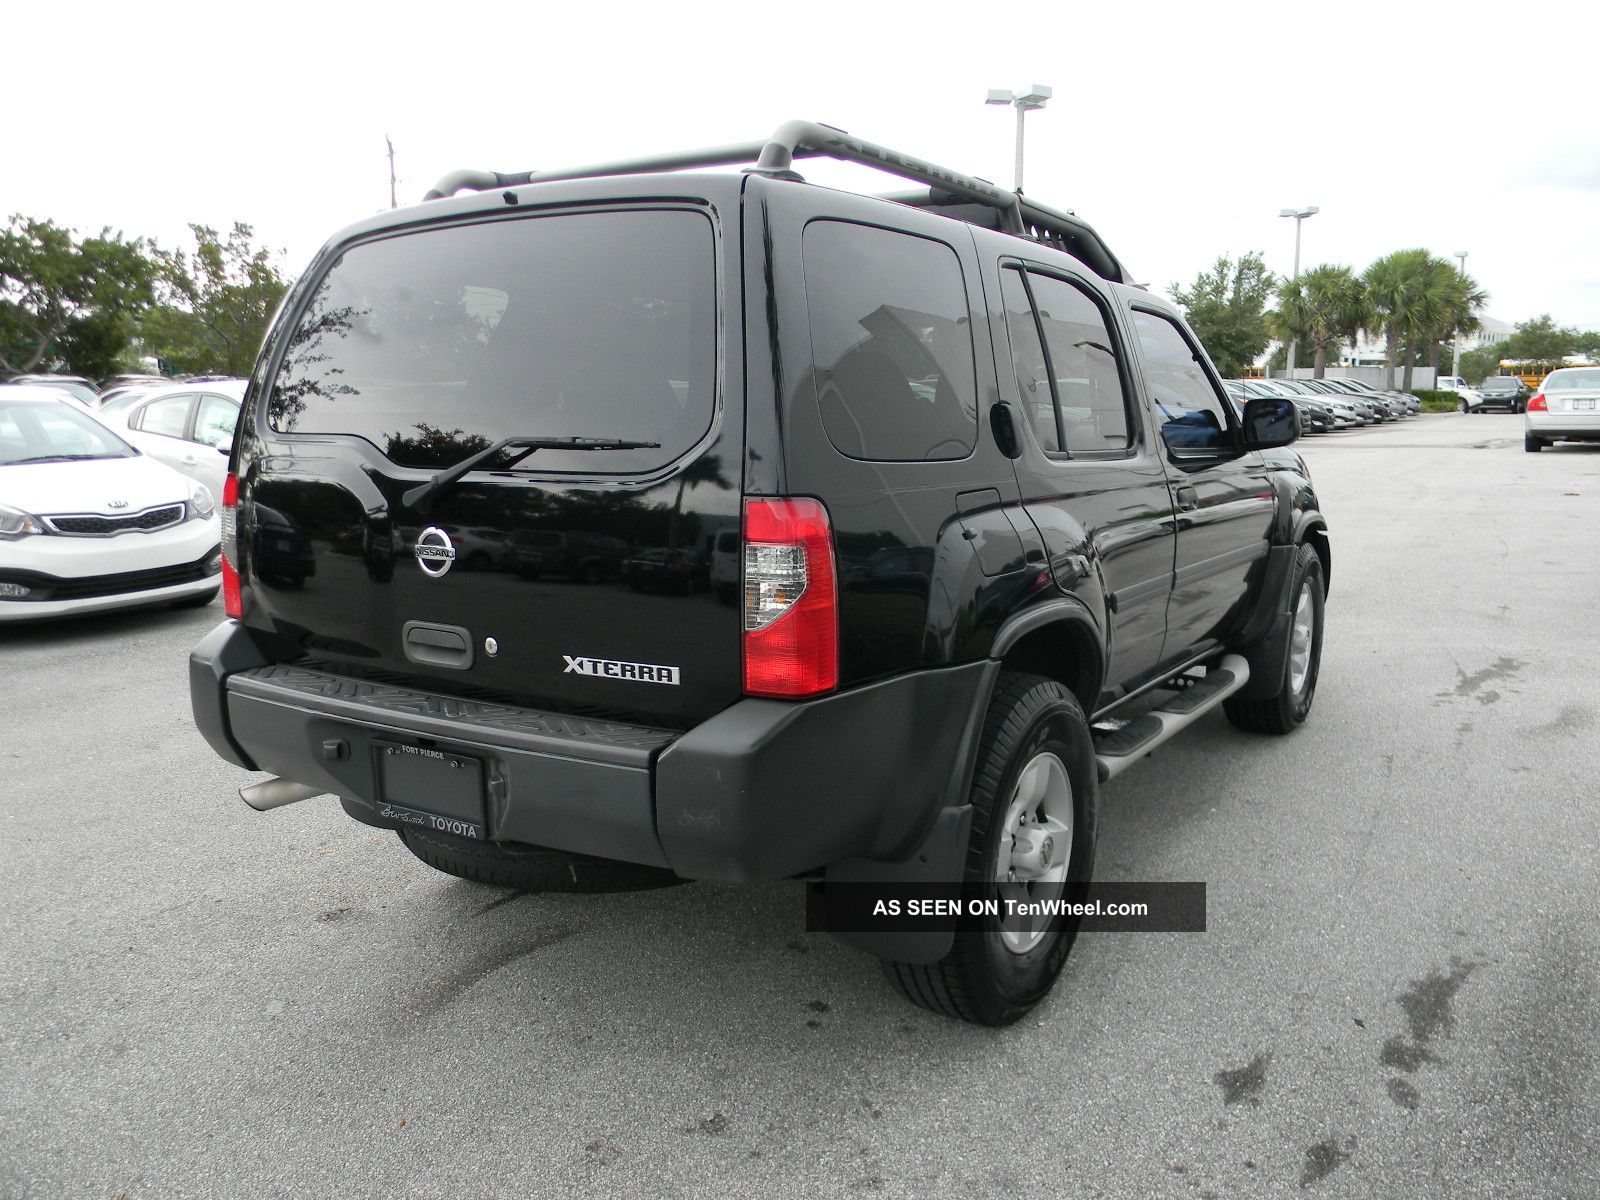 Looking for 2004 more nissan xterra sport utility vehicles #4